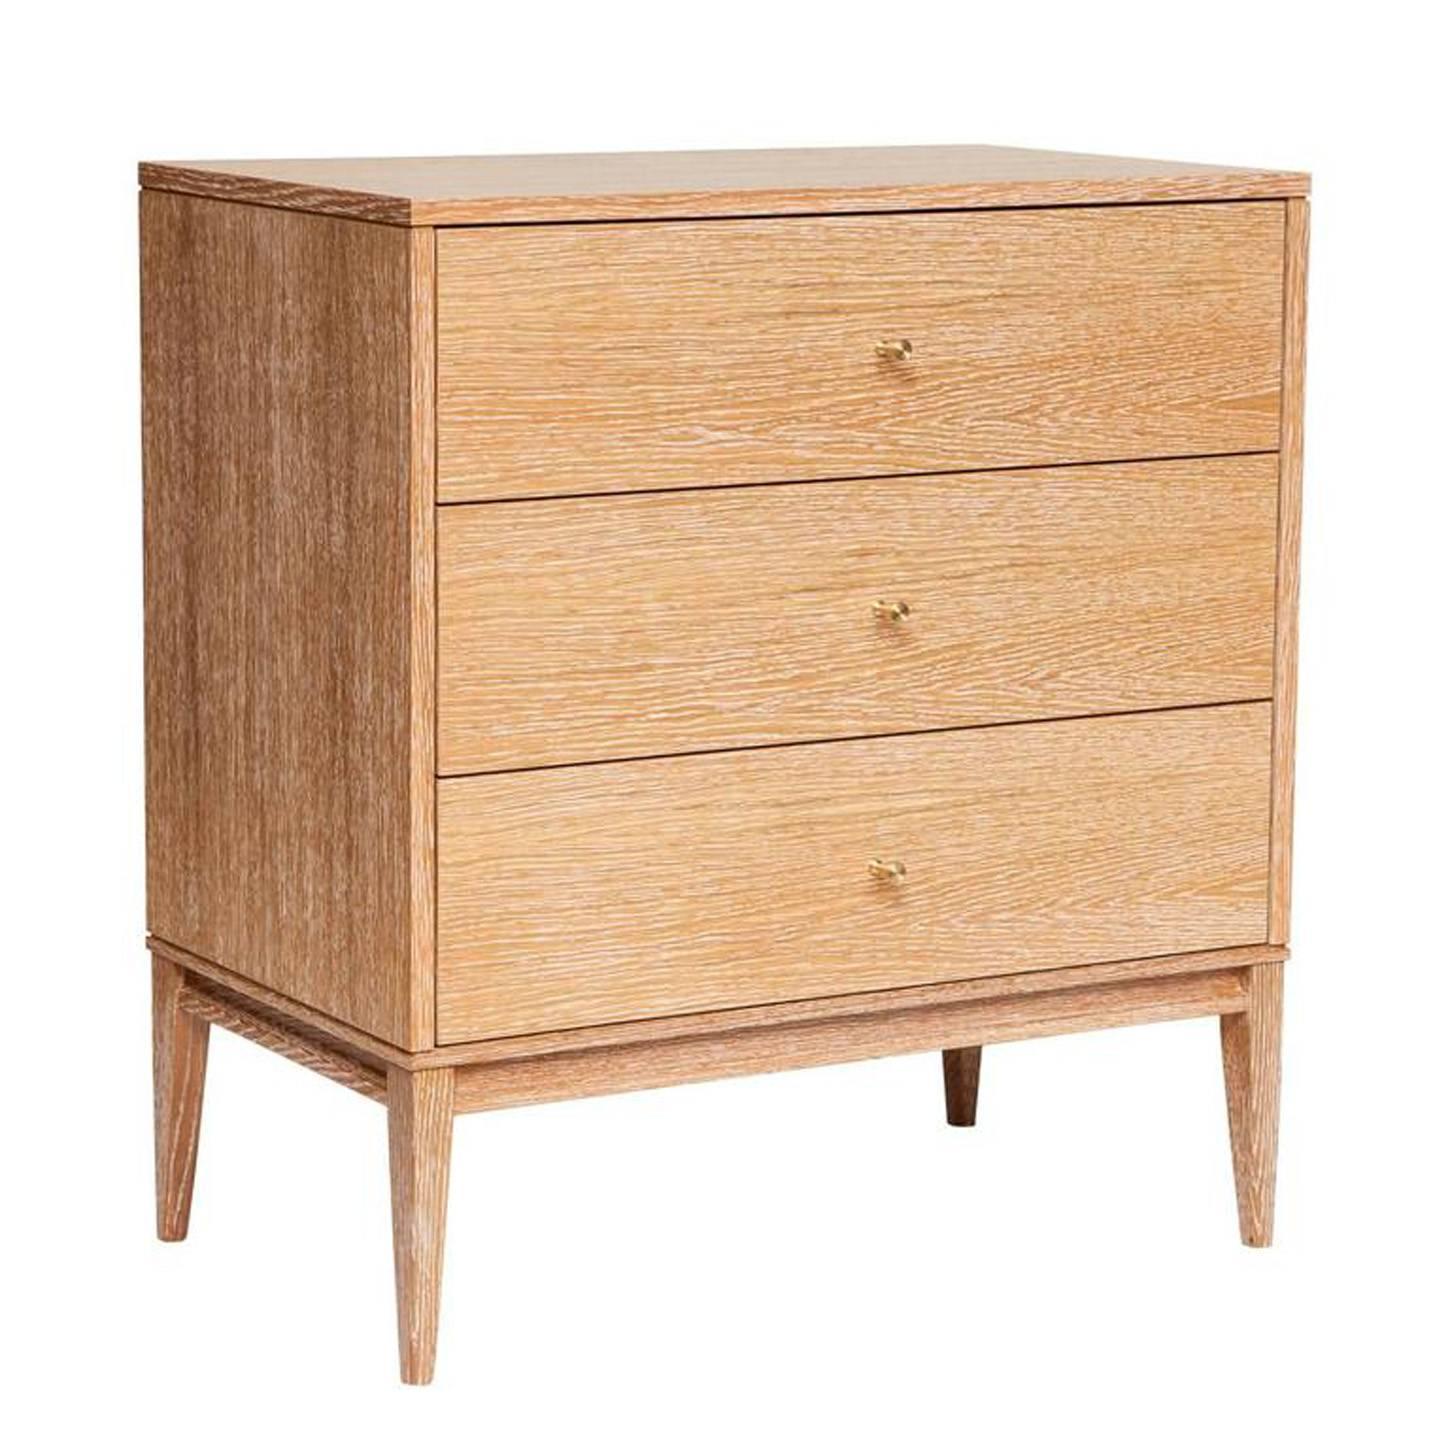 Cerused oak three-drawer dresser on apron frame base detailed with solid brass drawer pulls. Solid maple drawer boxes with under-mount soft close mechanical drawer slides.
Custom lacquer and wood finishes available.

Custom orders have a lead time